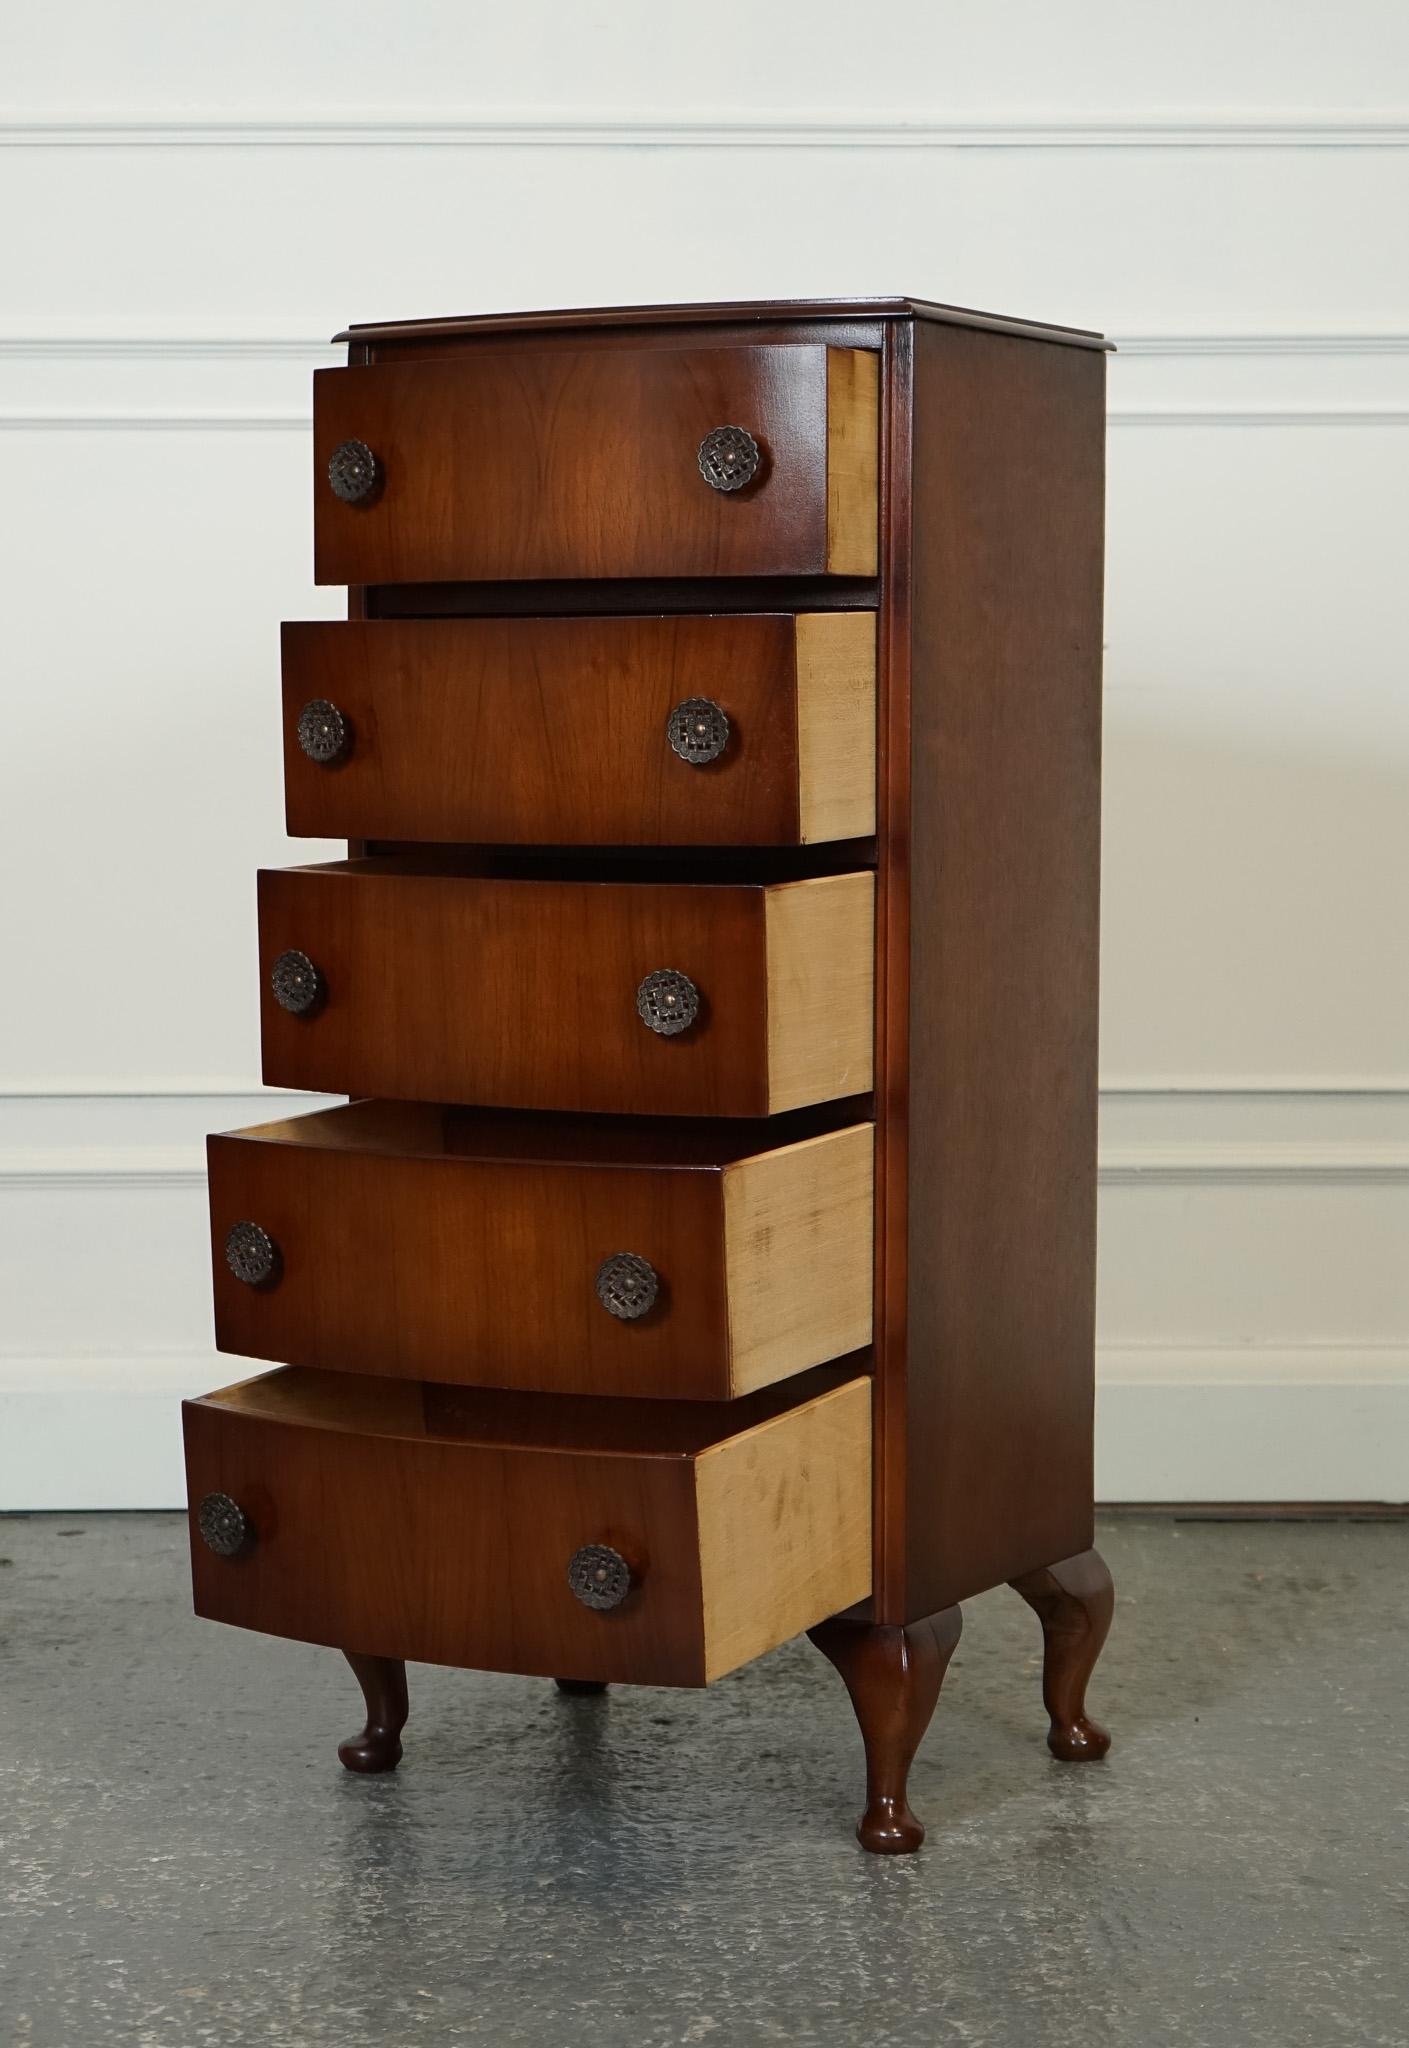 
We are delighted to offer for sale this Vintage Art Deco Tallboy.

The Vintage Art Deco Bow Fronted Mahogany Tall Boy Chest of Drawers features a stunning mahogany wood construction with a bow-front design.

 It is elegantly supported by Queen Ann